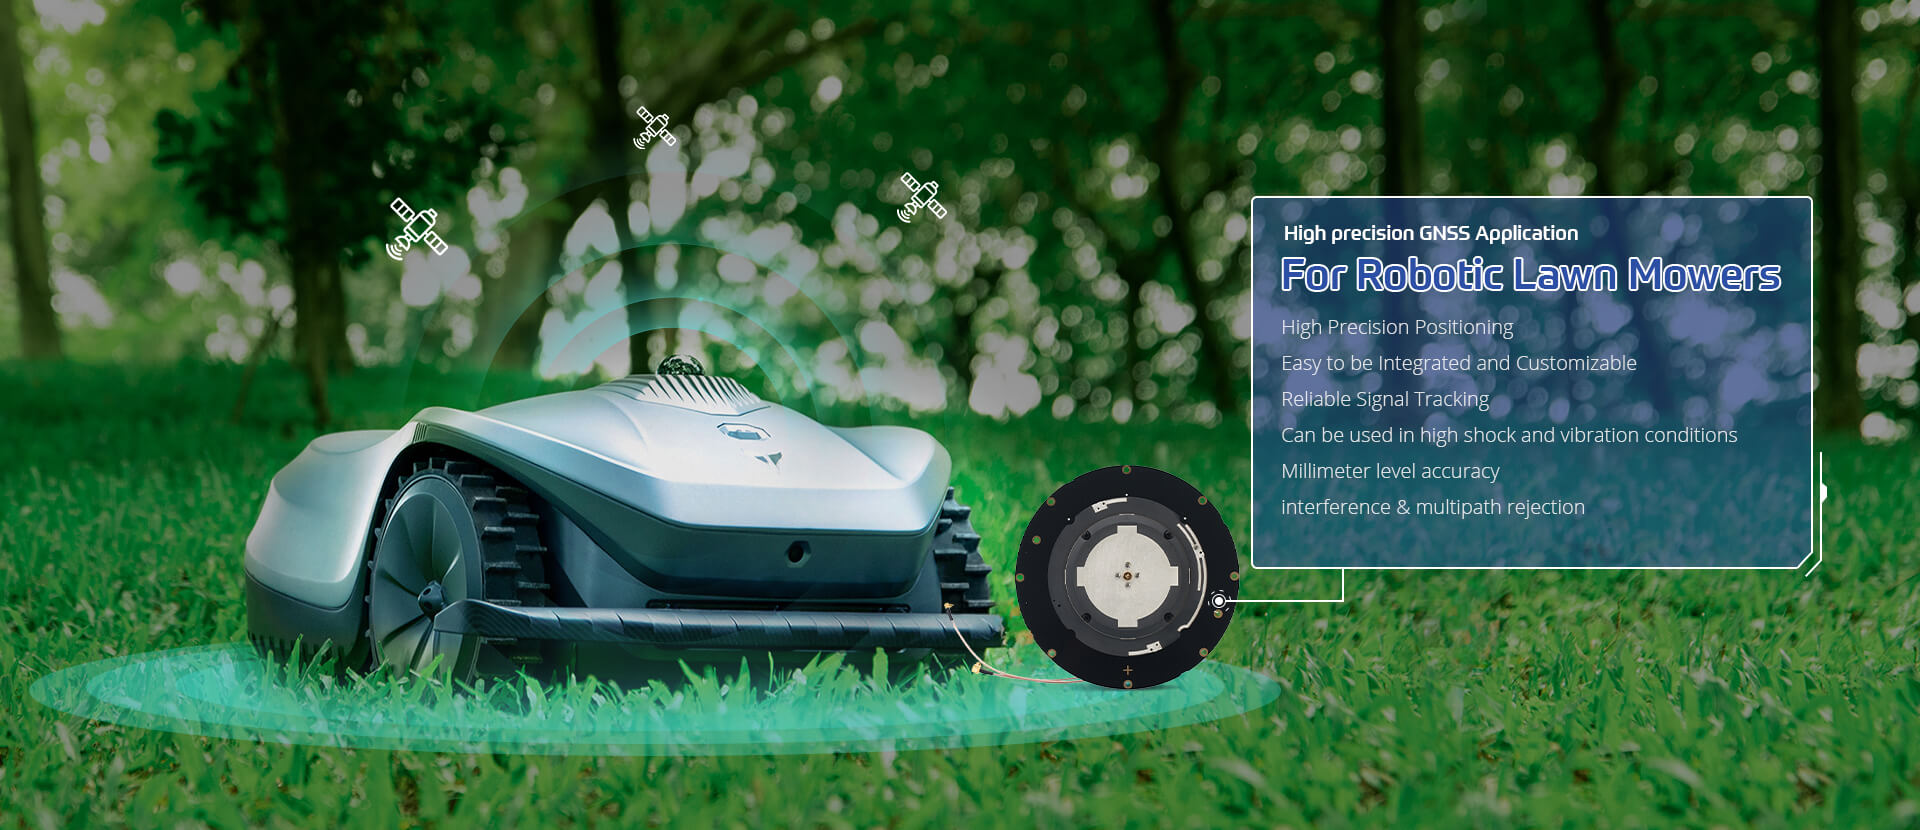 High precision GNSS Application For Robotic Lawn Mowers